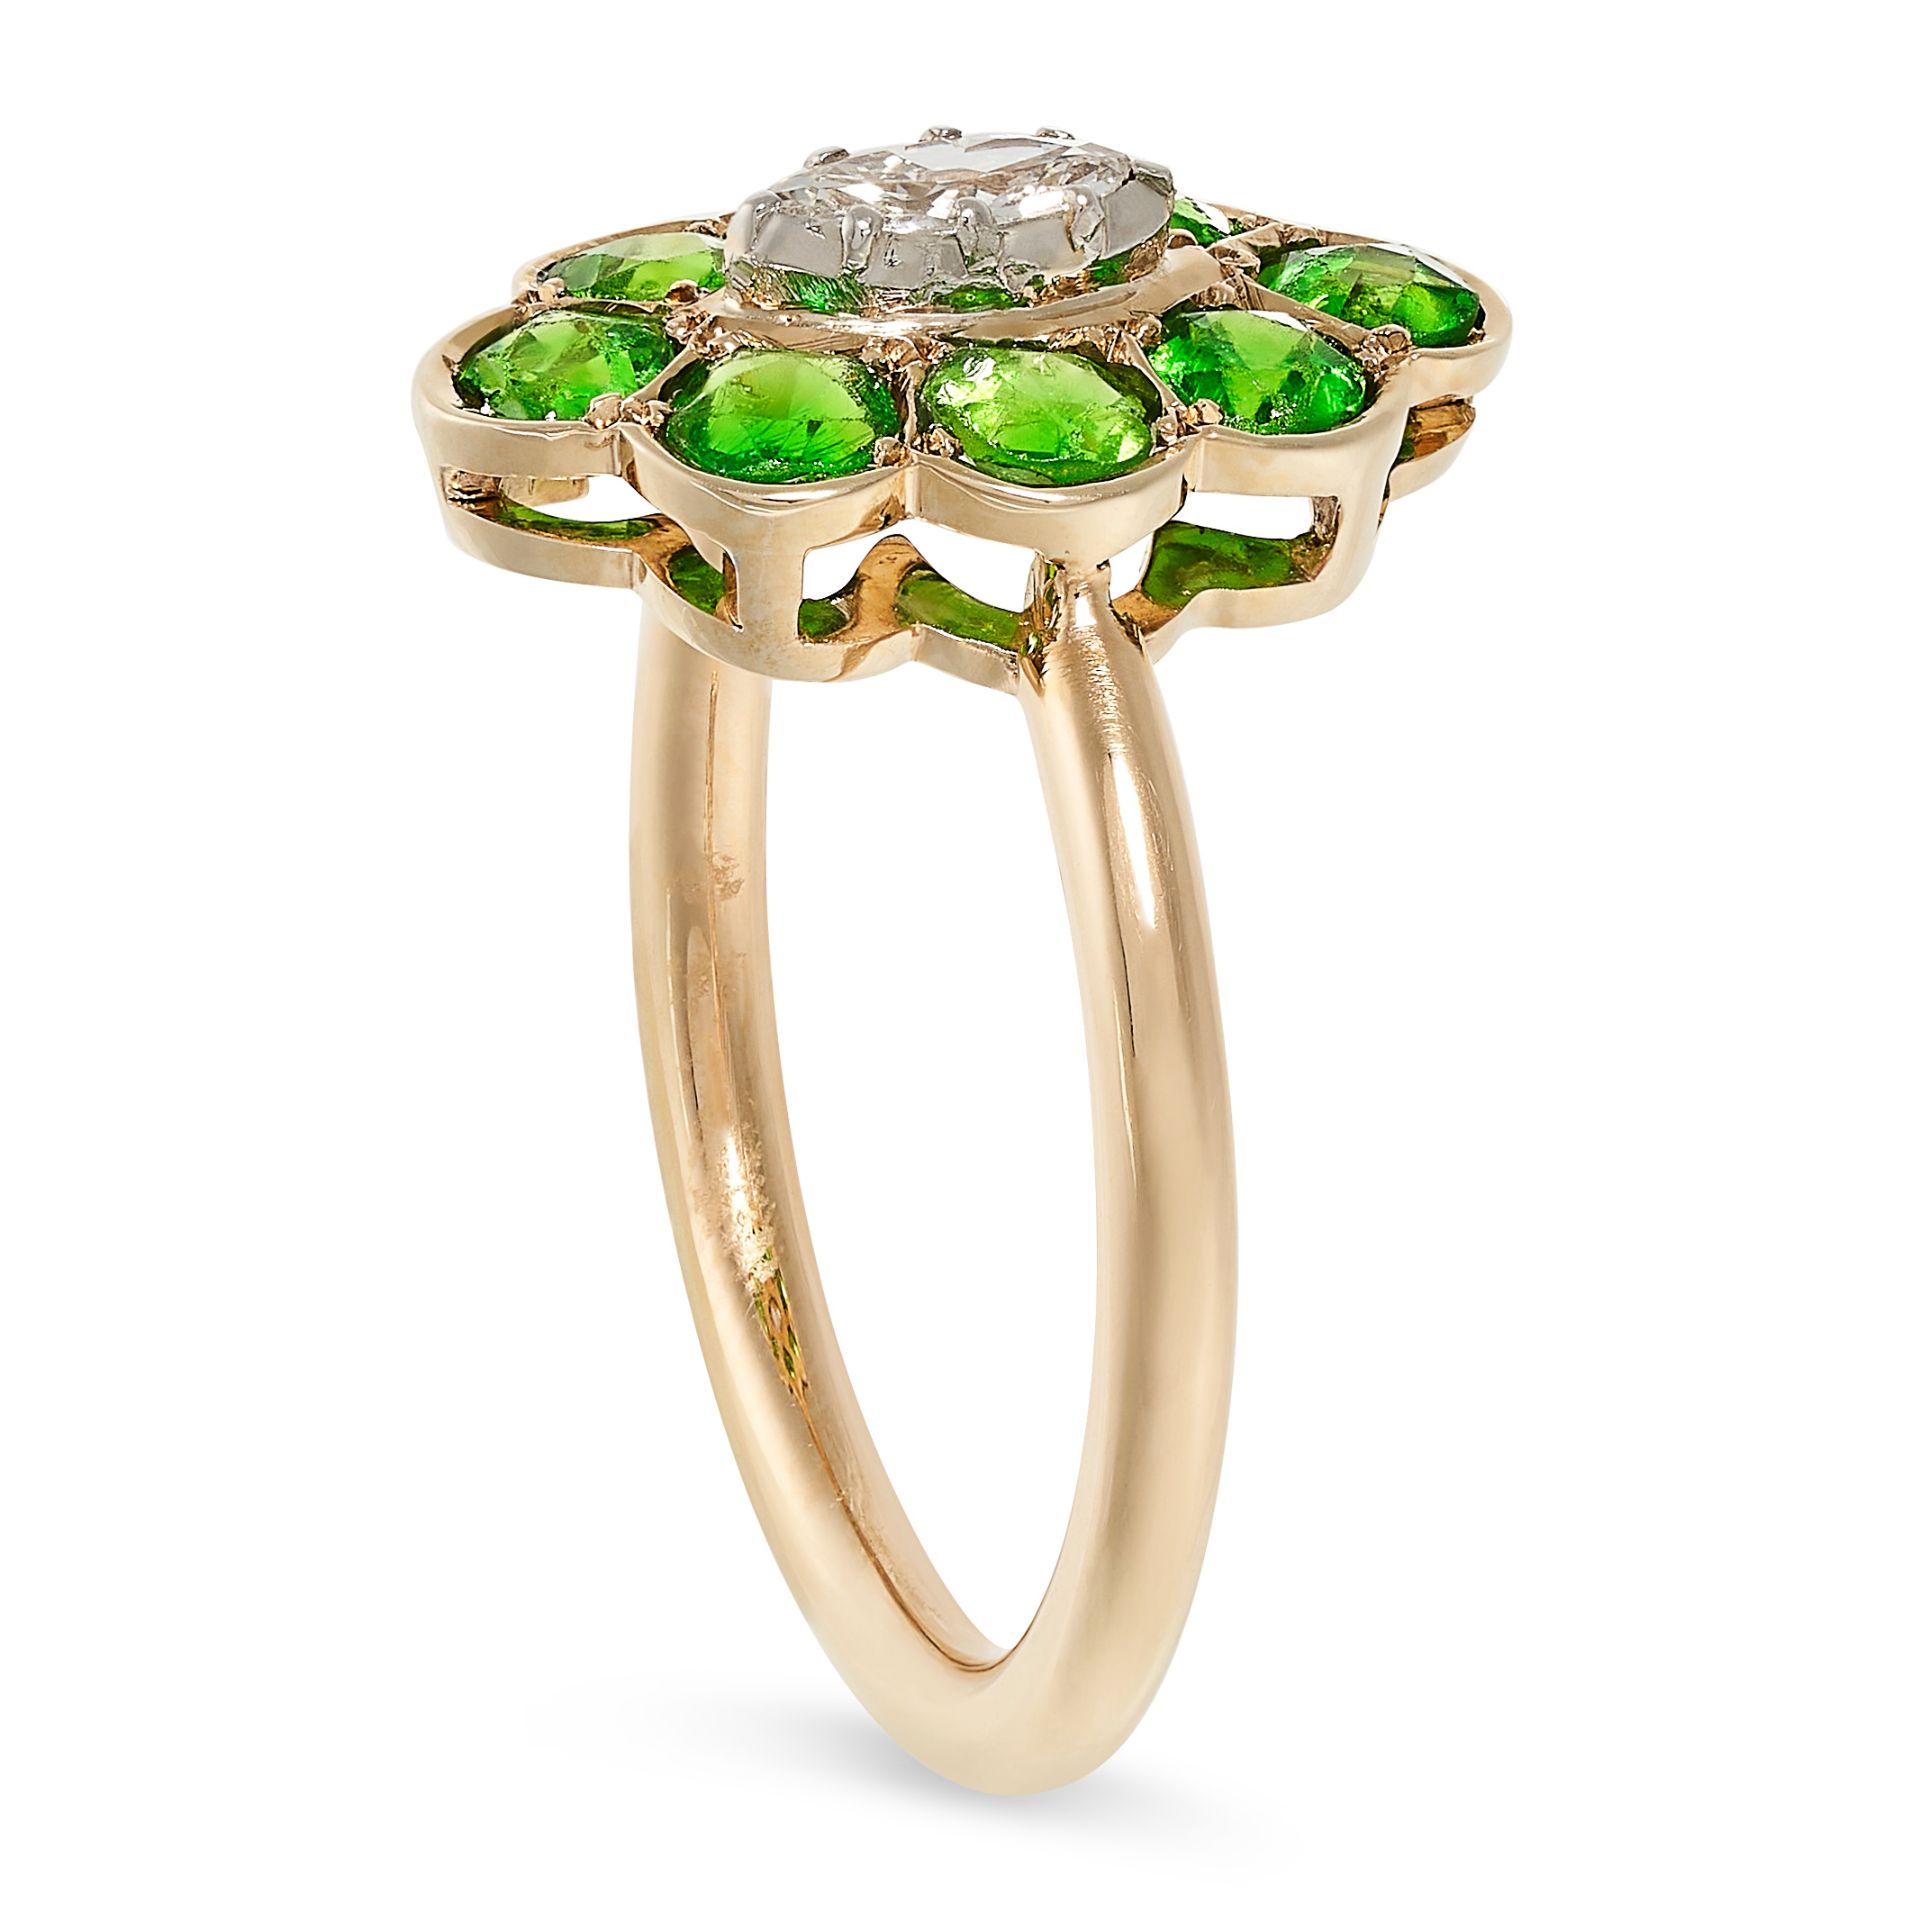 A DEMANTOID GARNET AND DIAMOND RING the navette face set with a central a marquise cut diamond of - Image 2 of 2